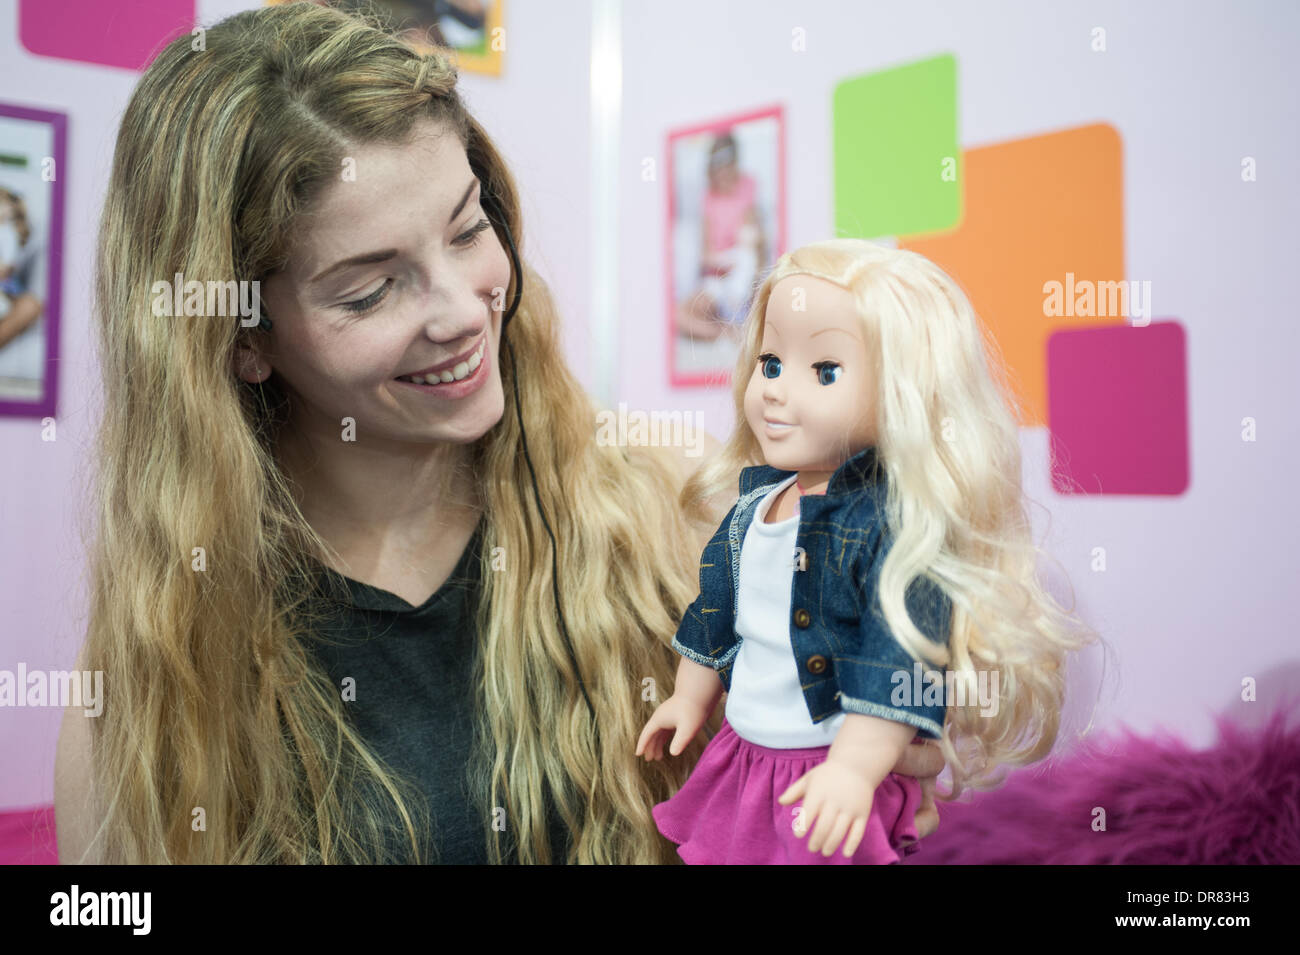 London, UK - 21 January 2014: Daisy Tonge holds My Friend Cayla by  Vivid Toy Group, the world's first internet-connected doll during the Toy Fair 2014 at Kensington Olympia. Credit:  Piero Cruciatti/Alamy Live News Stock Photo